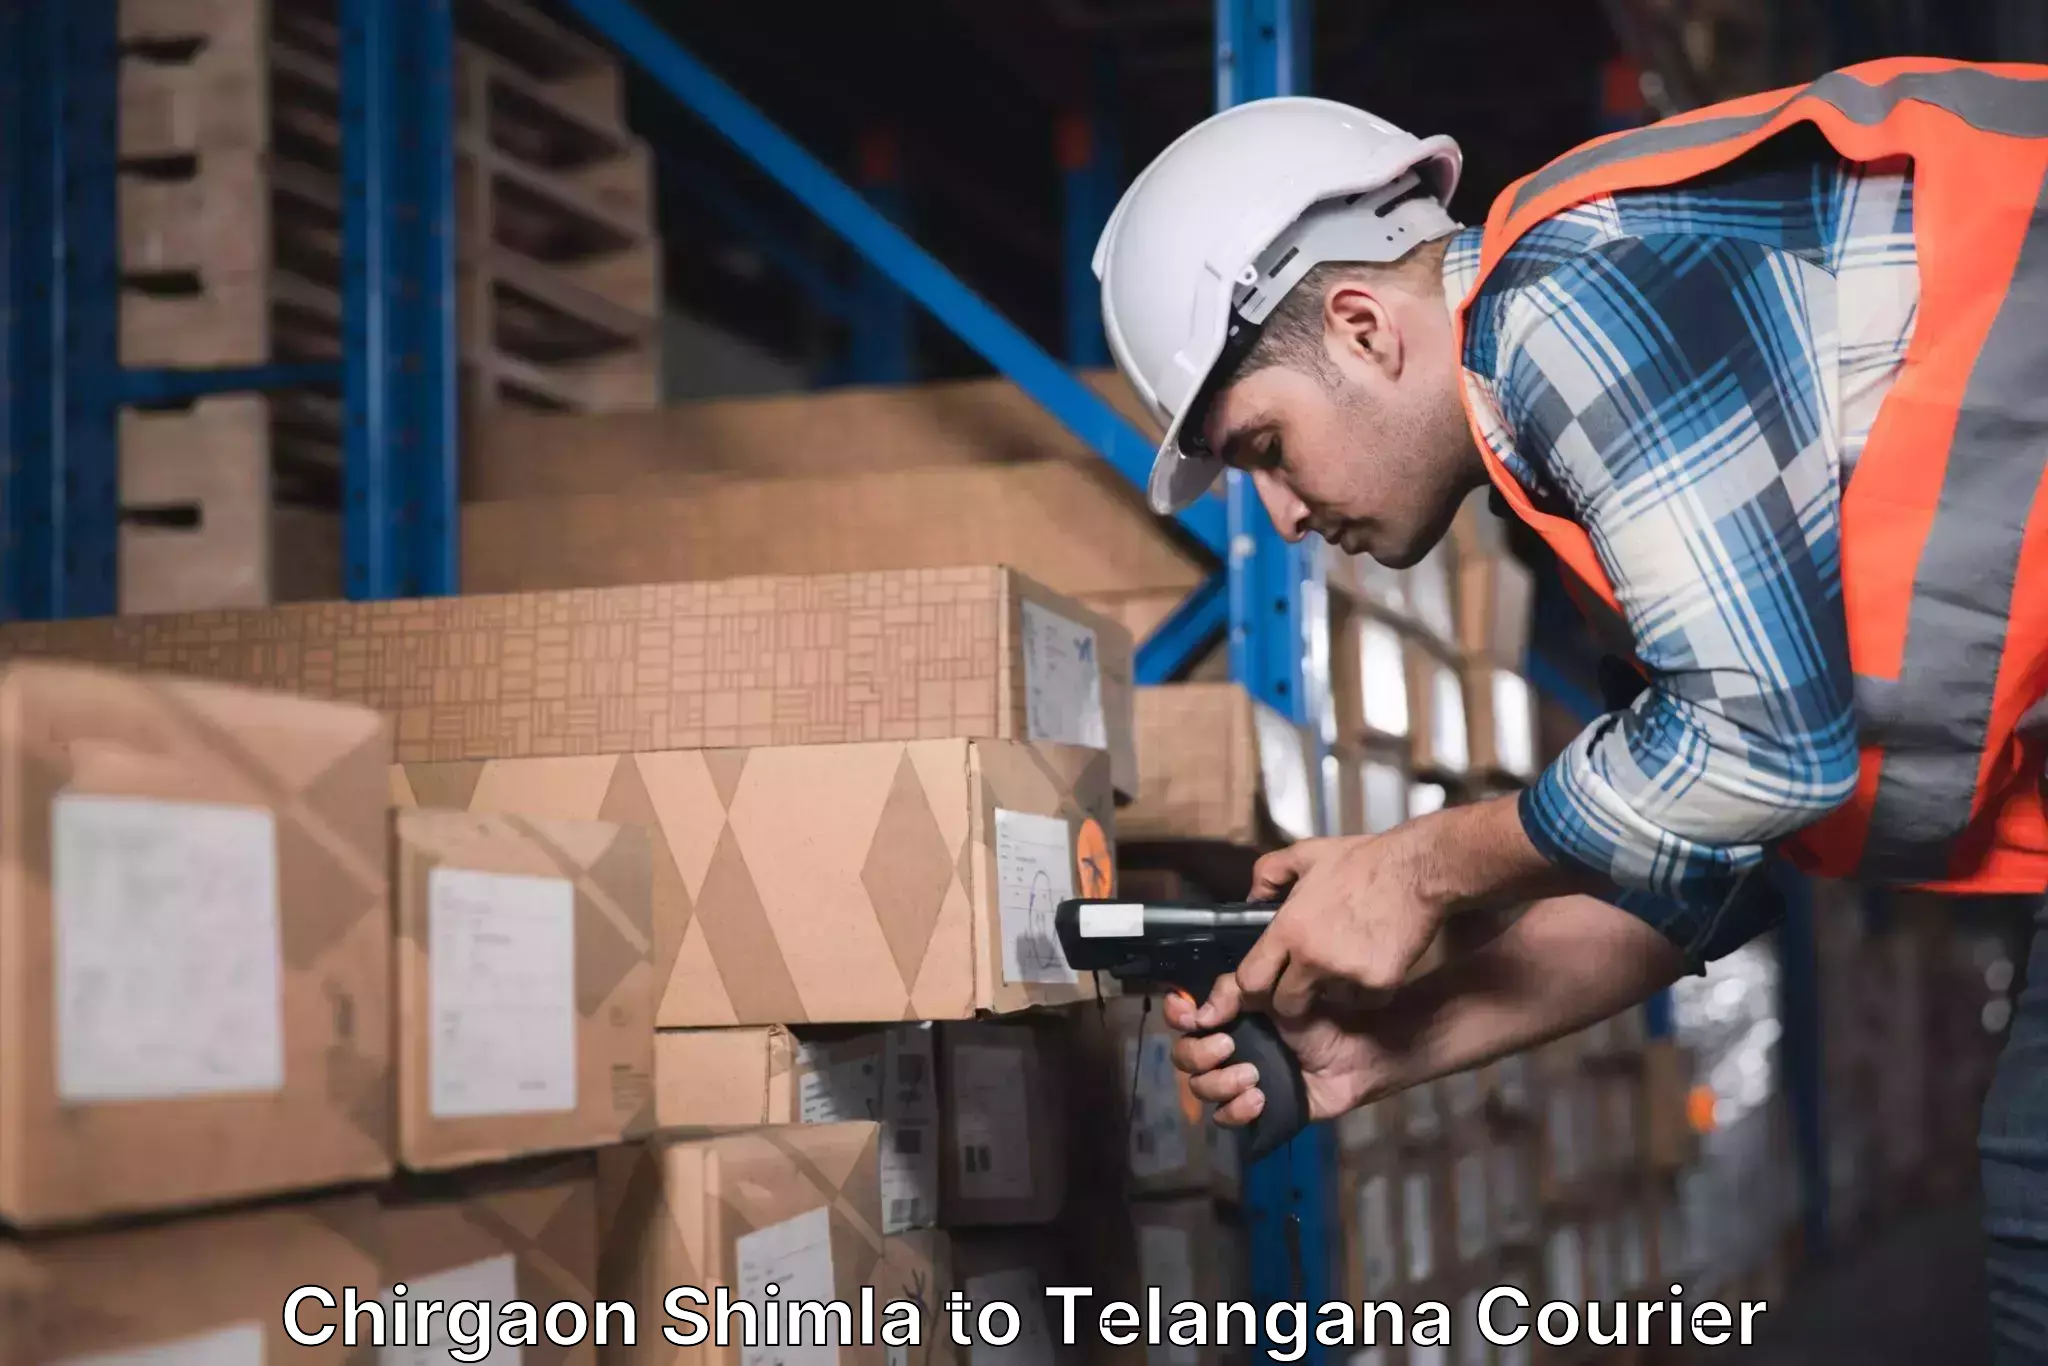 State-of-the-art courier technology Chirgaon Shimla to Telangana